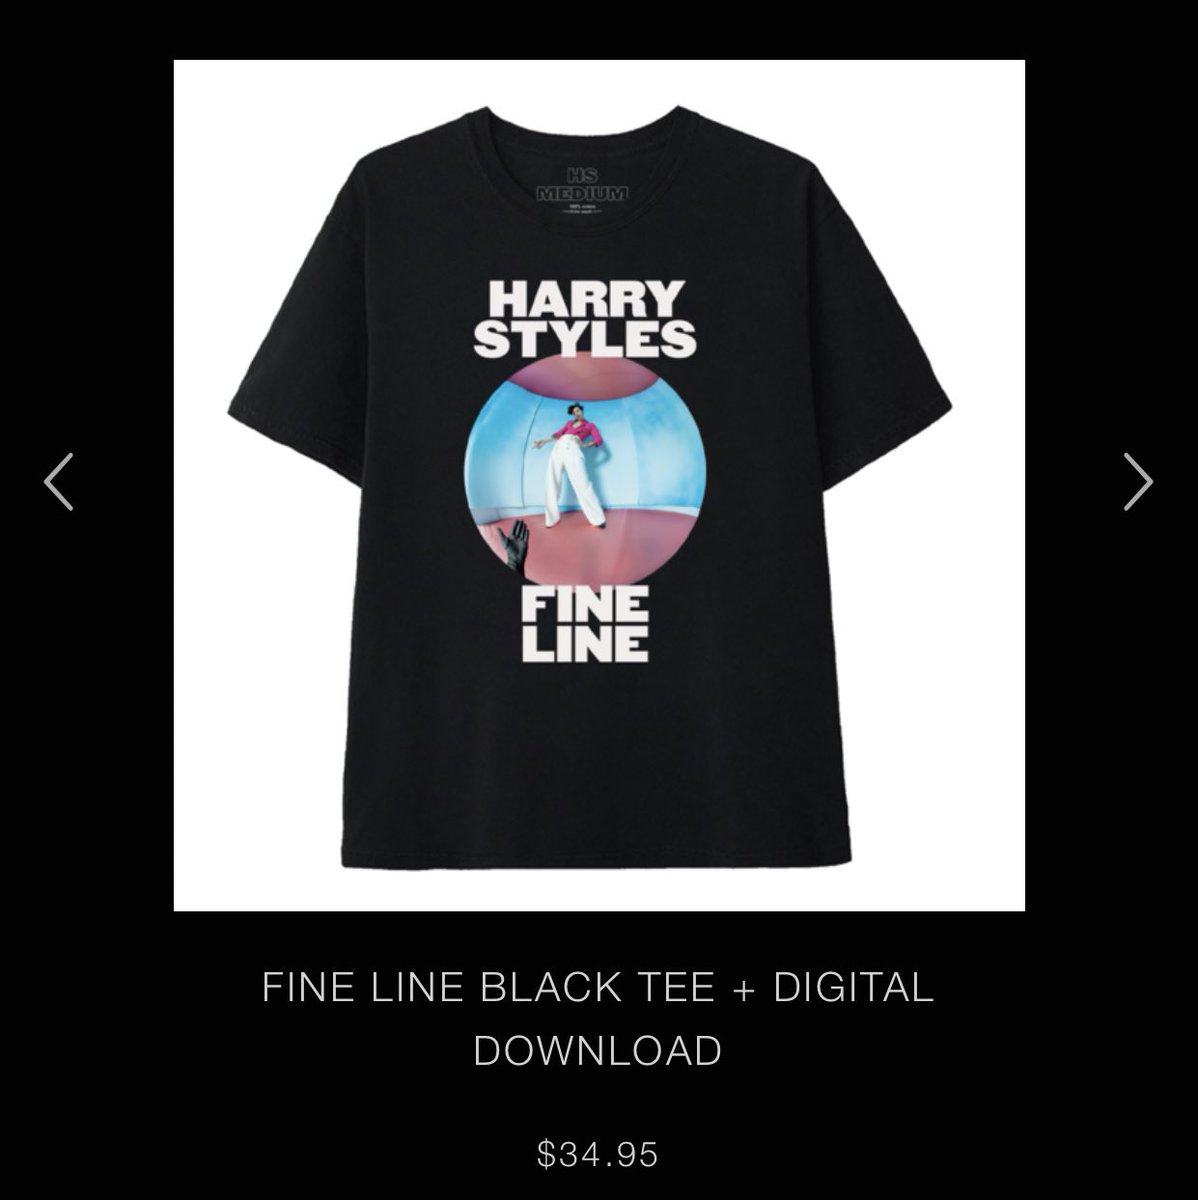 INTERNATIONAL HARRY STYLES MERCH GIVEAWAYwinner gets to choose one item under $40 from harry’s shop!!! rules to enter:-follow me-like/rt-reply with a pic of 2013 harry -follow my insta for an extra entry (@atzin_olguin)giveaway ends on sunday (5/31) at 12am PST 